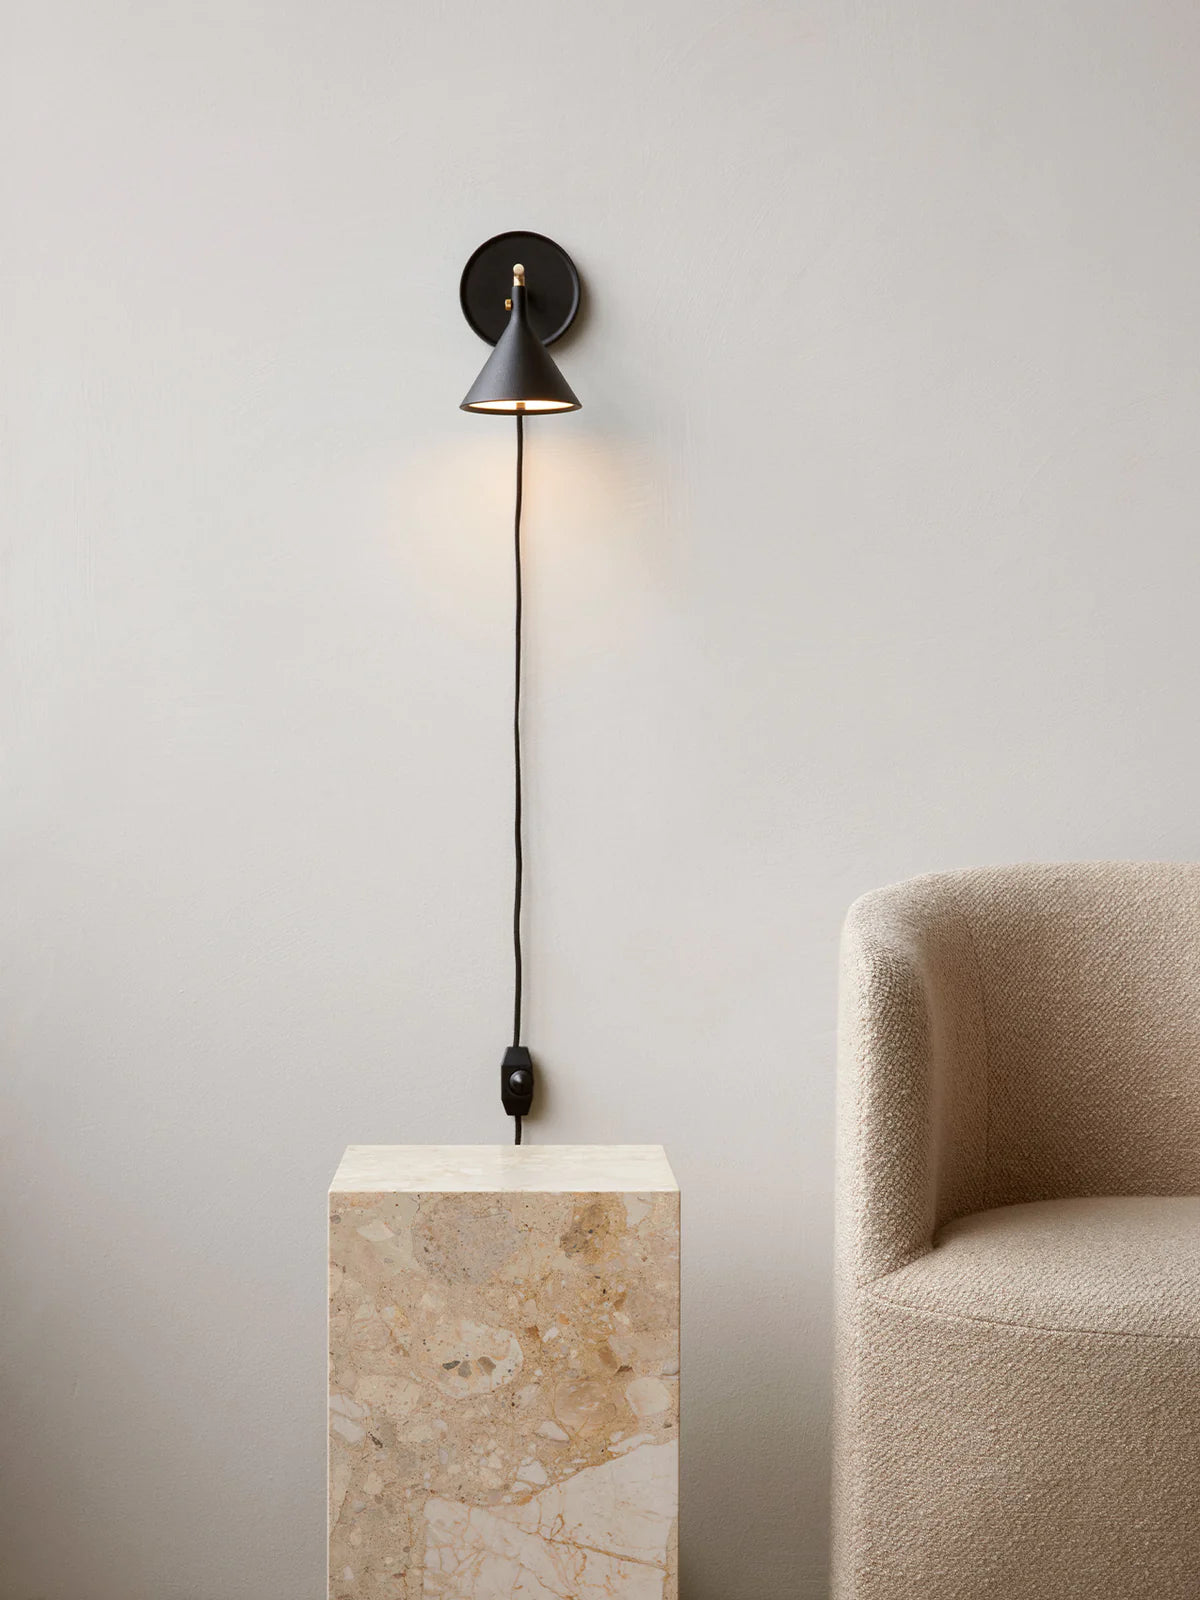 Cast Sconce Wall Lamp Diffuser, Dimmer by Menu in Black set in a light and neutral interior at Enter The Loft.